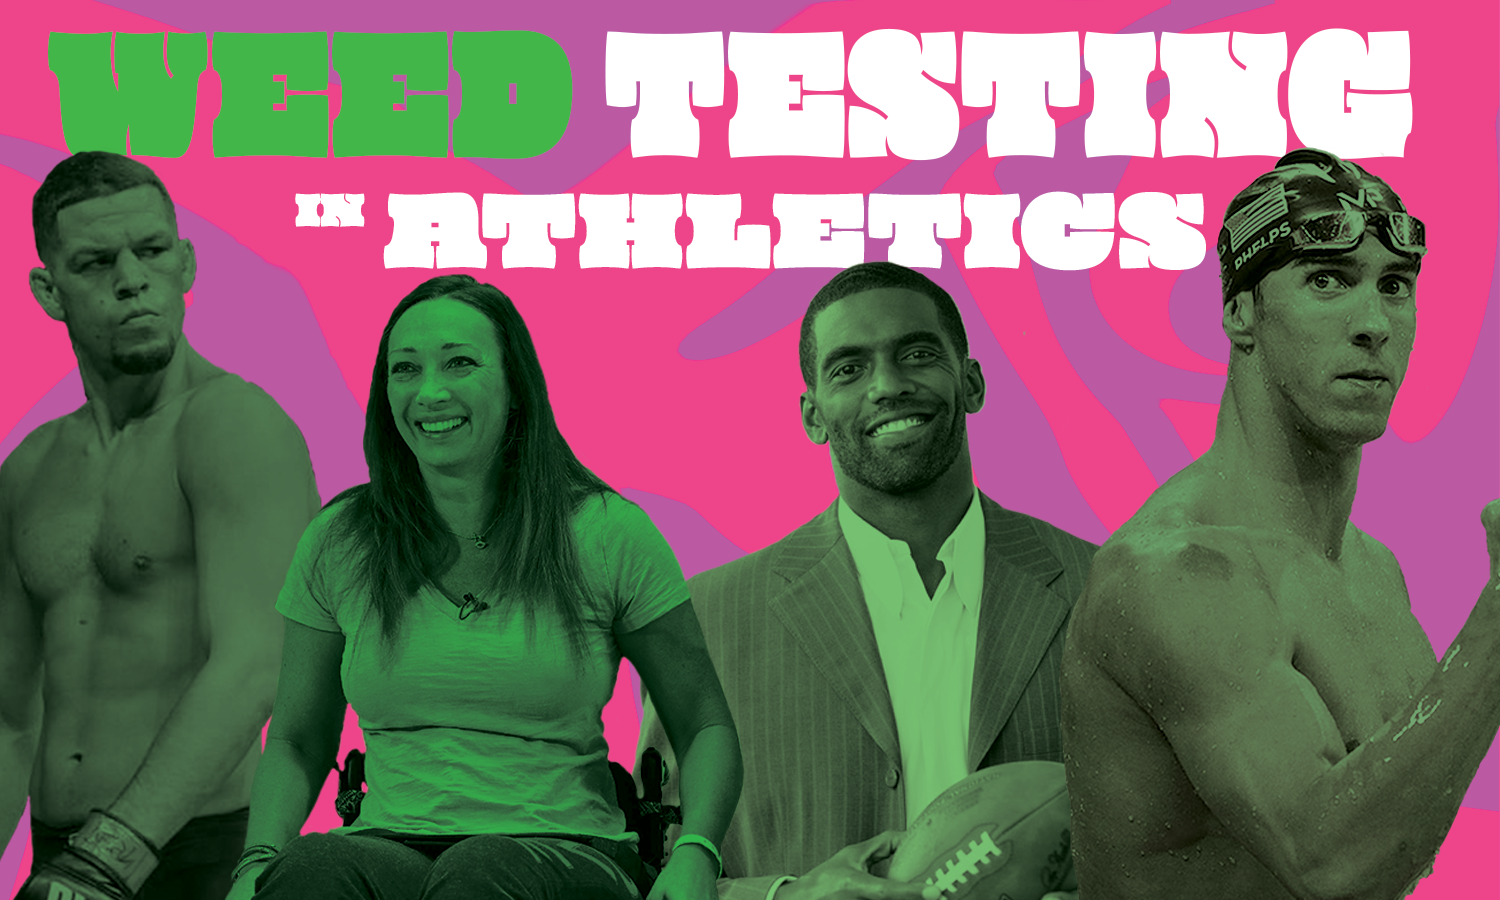 graphic illustration depicting four famous athletes with the words "Weed Testing in Athletics" above